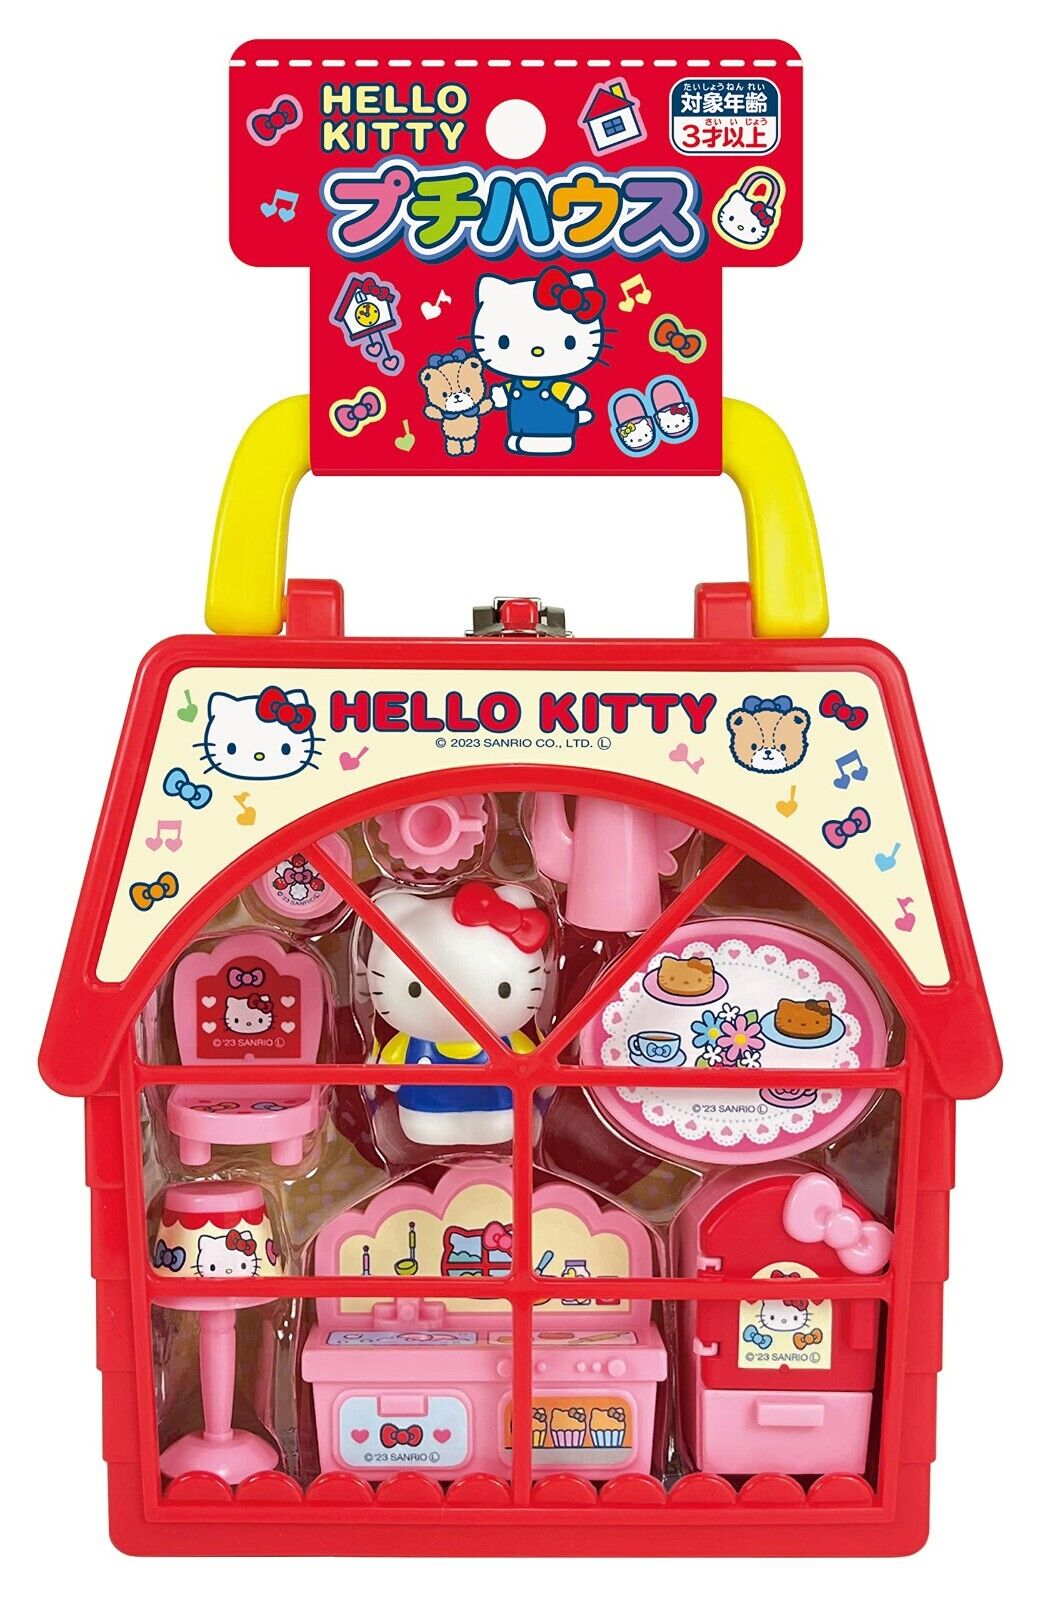 New Hello Kitty Small House 3 Years Old Toy, available exclusively in JAPAN